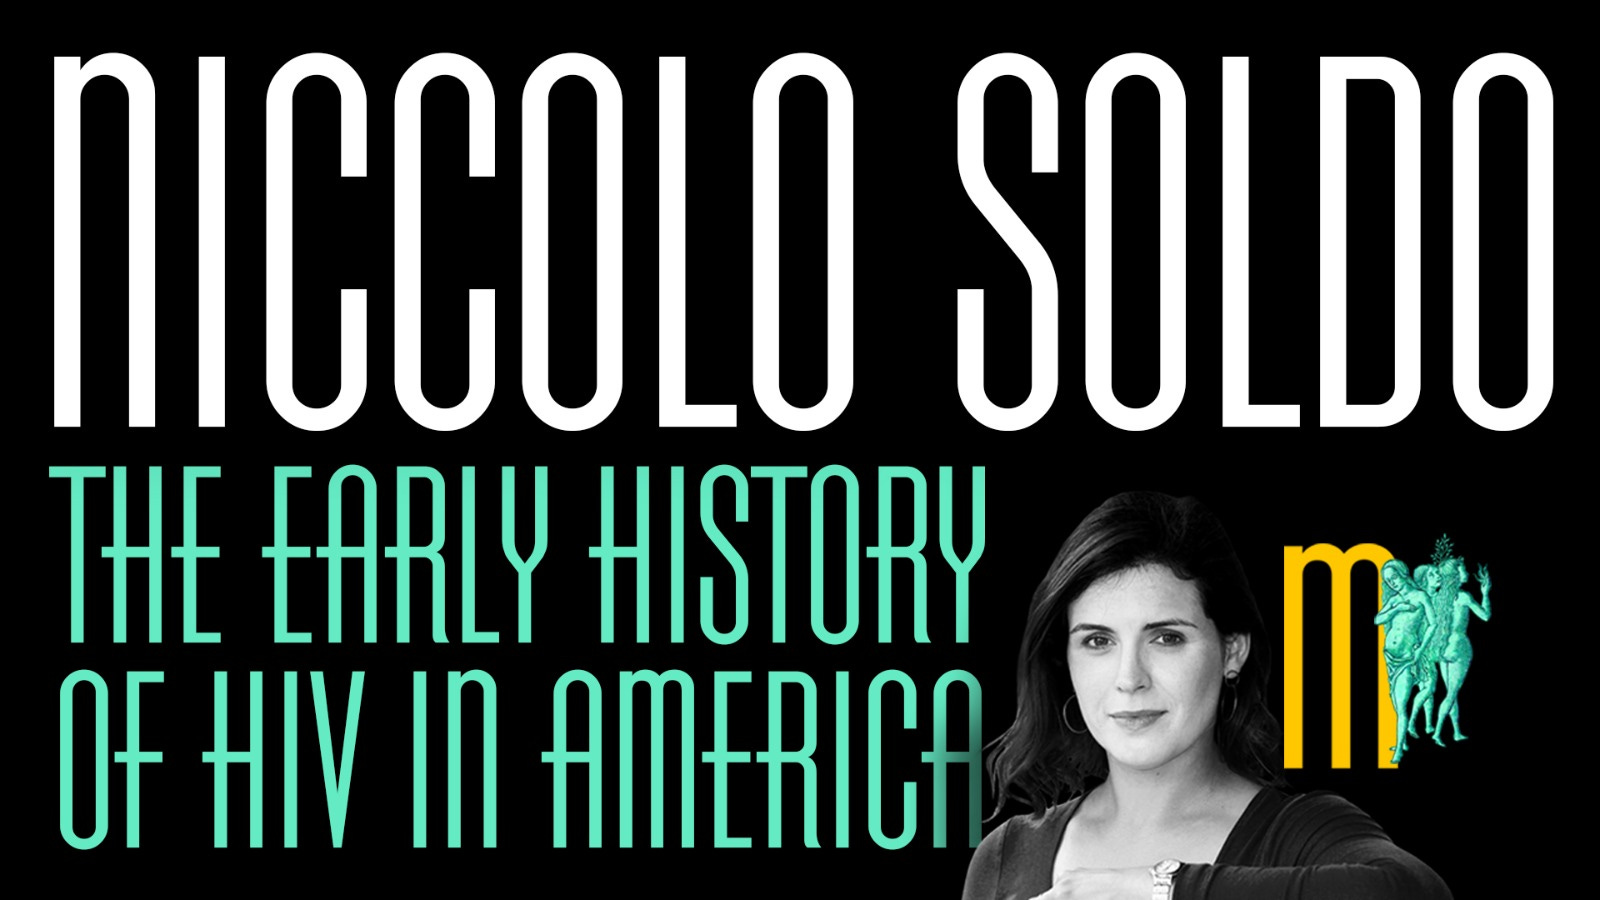 The Early History of HIV in America - Niccolo Soldo | Maiden Mother Matriarch 26